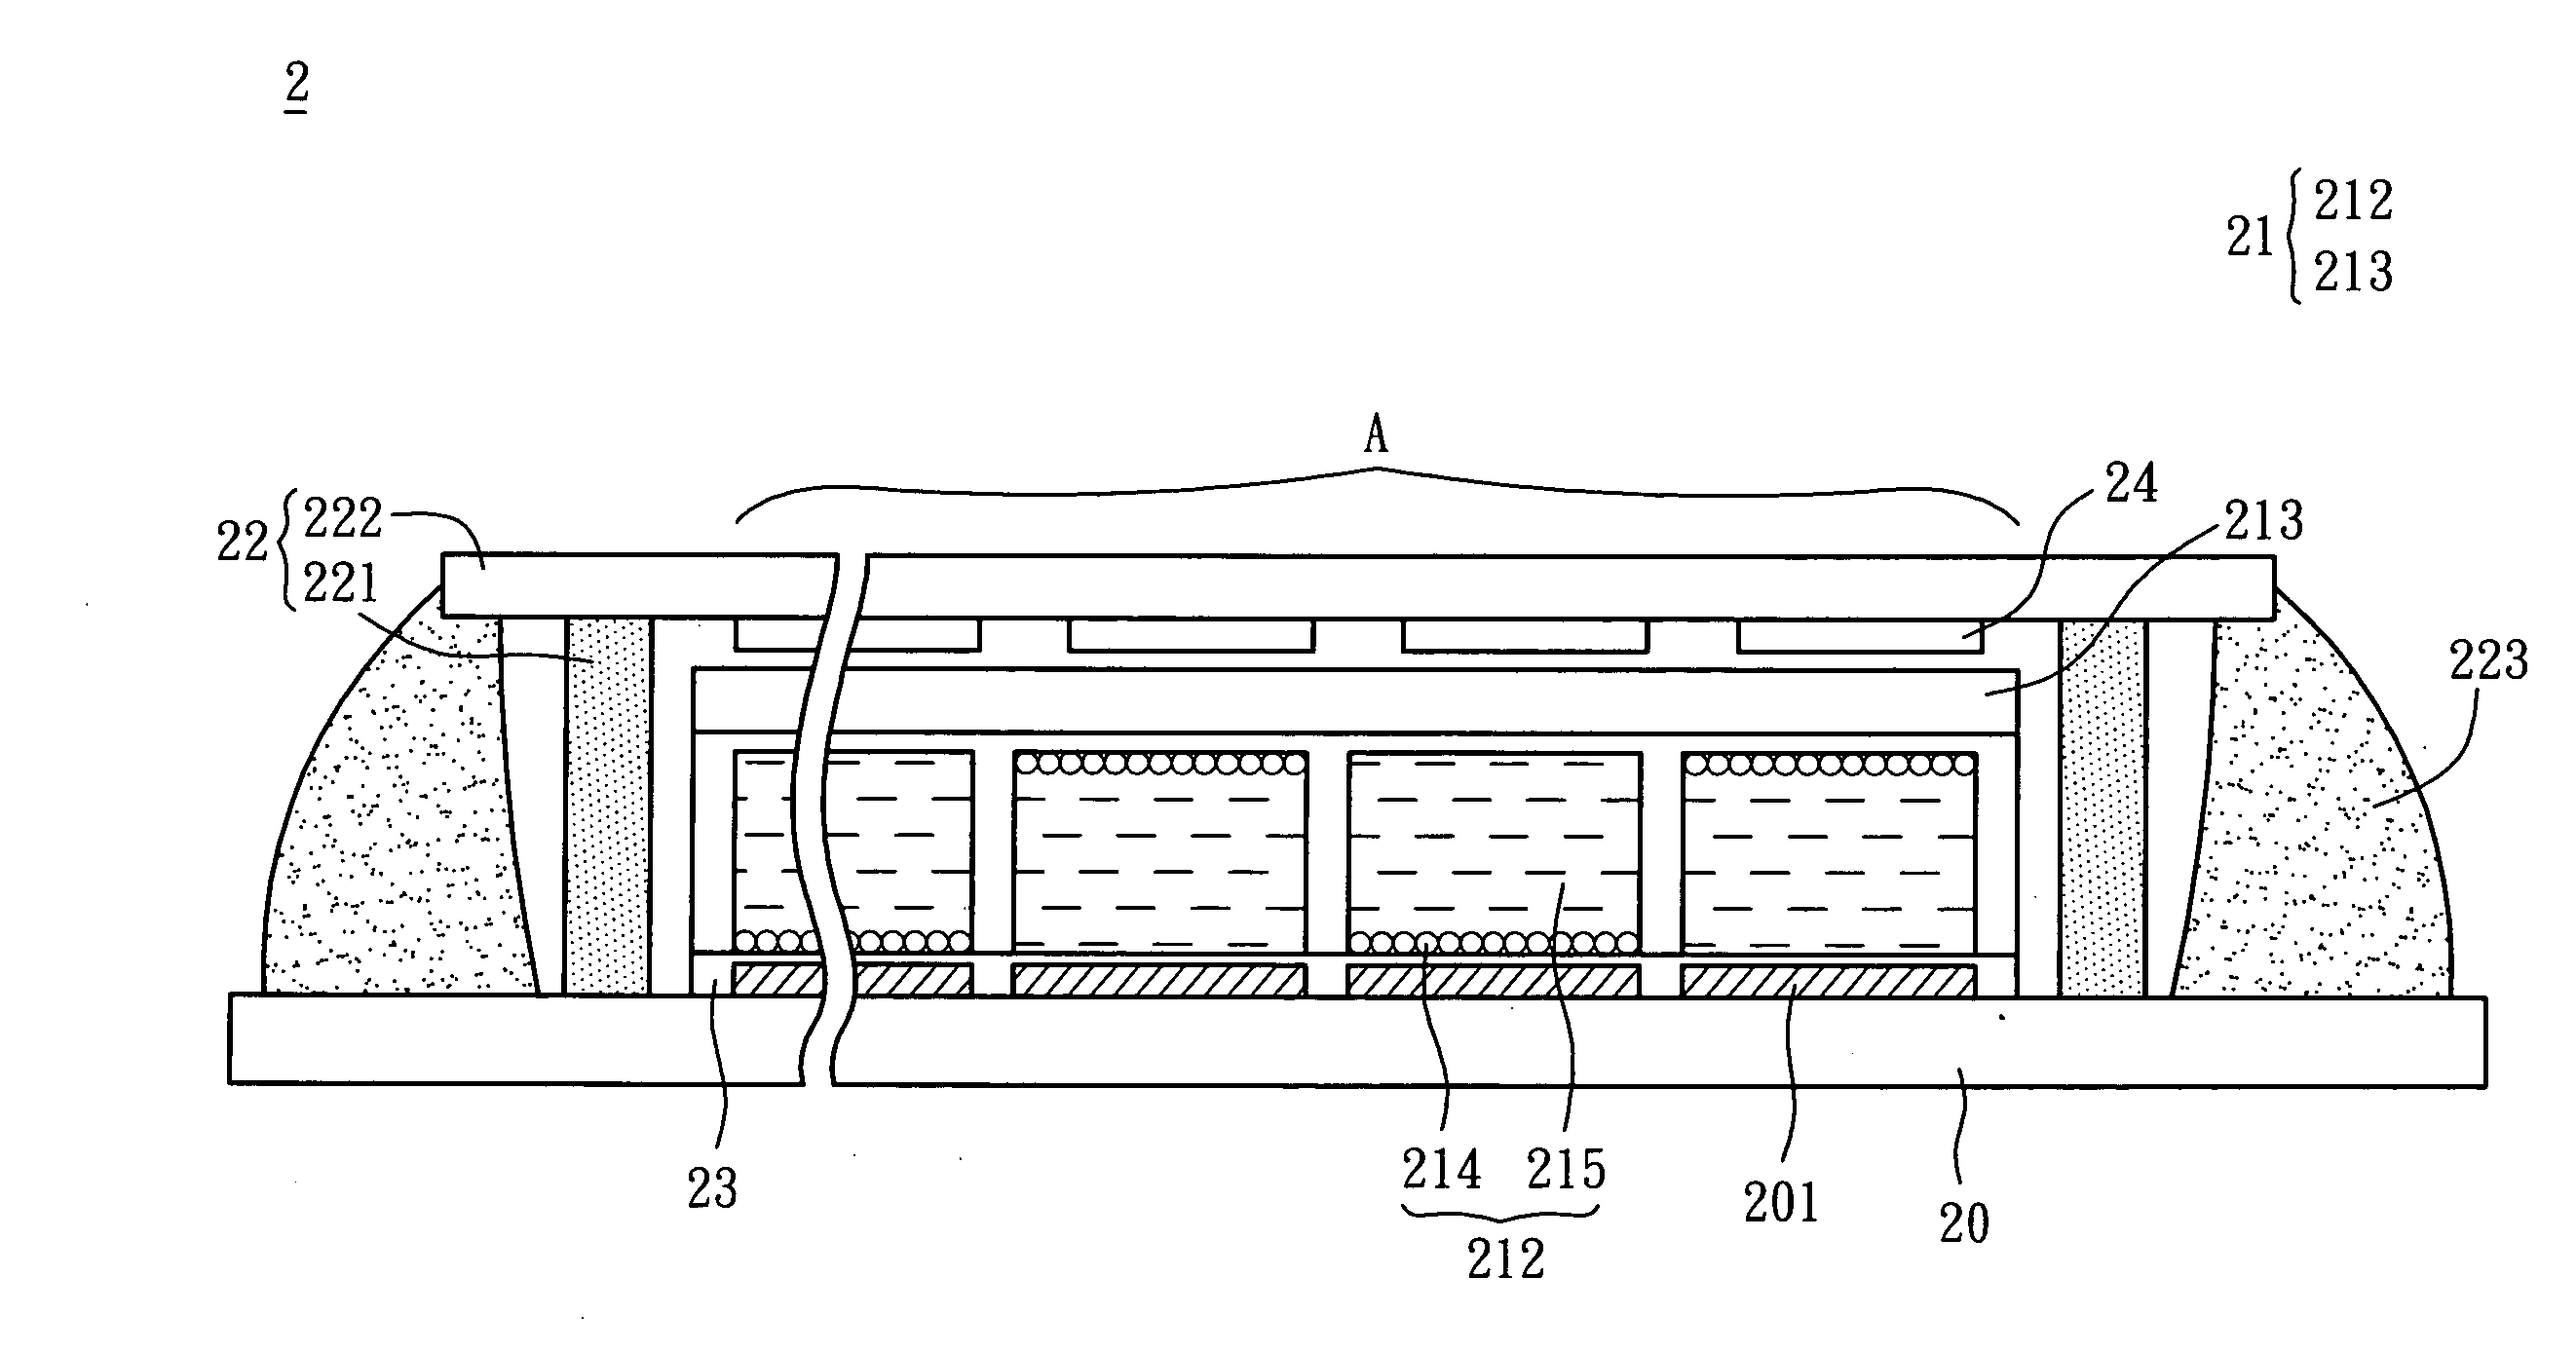 Electronic paper apparatus